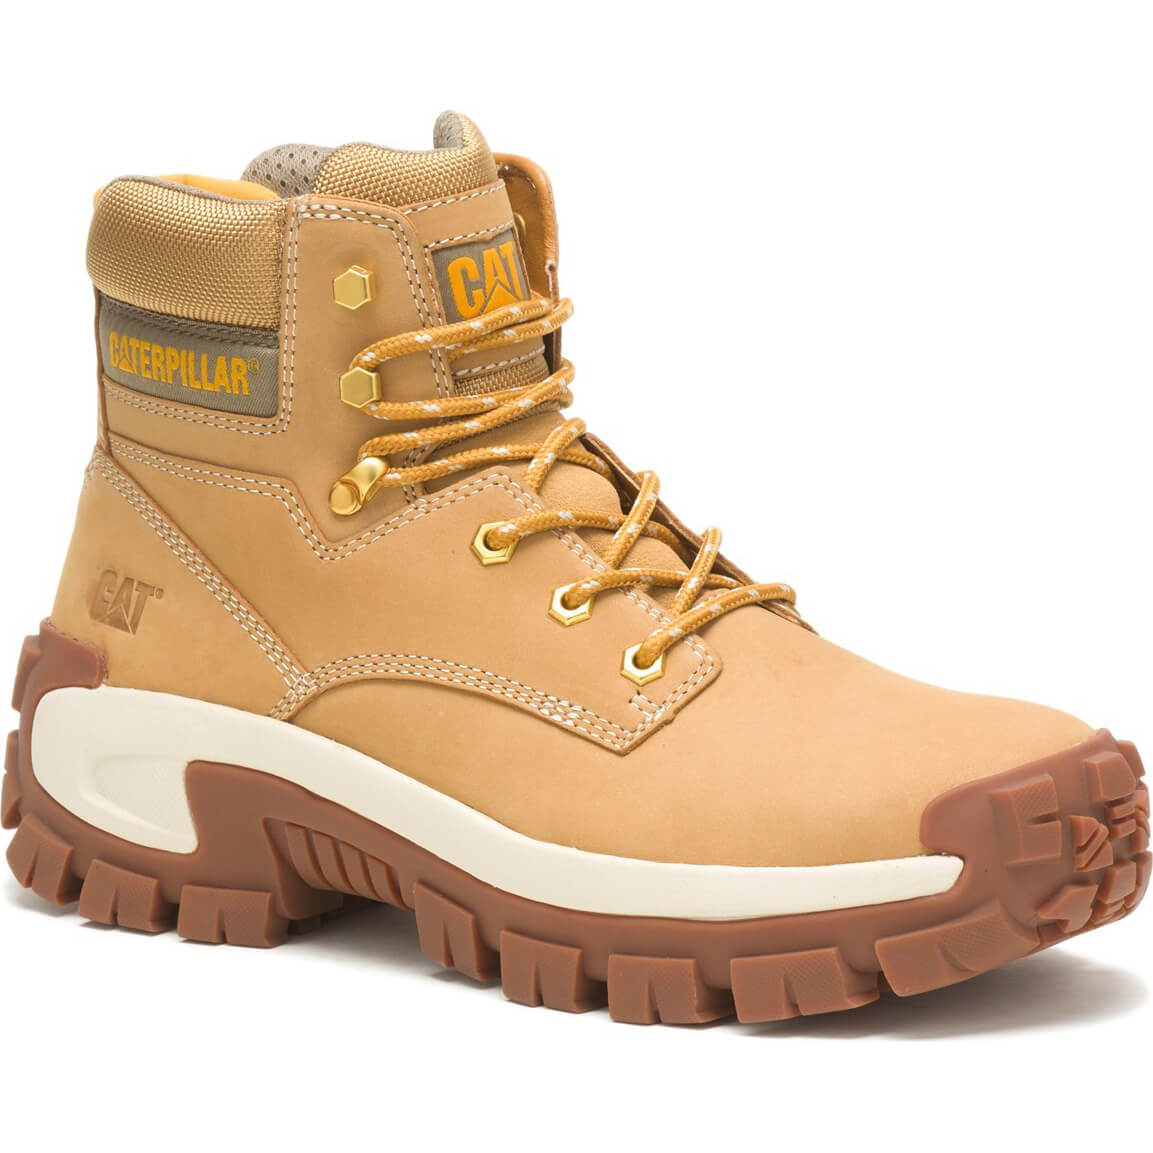 Image of Caterpillar Mens Invader Hiker Safety Boot Honey Size 8